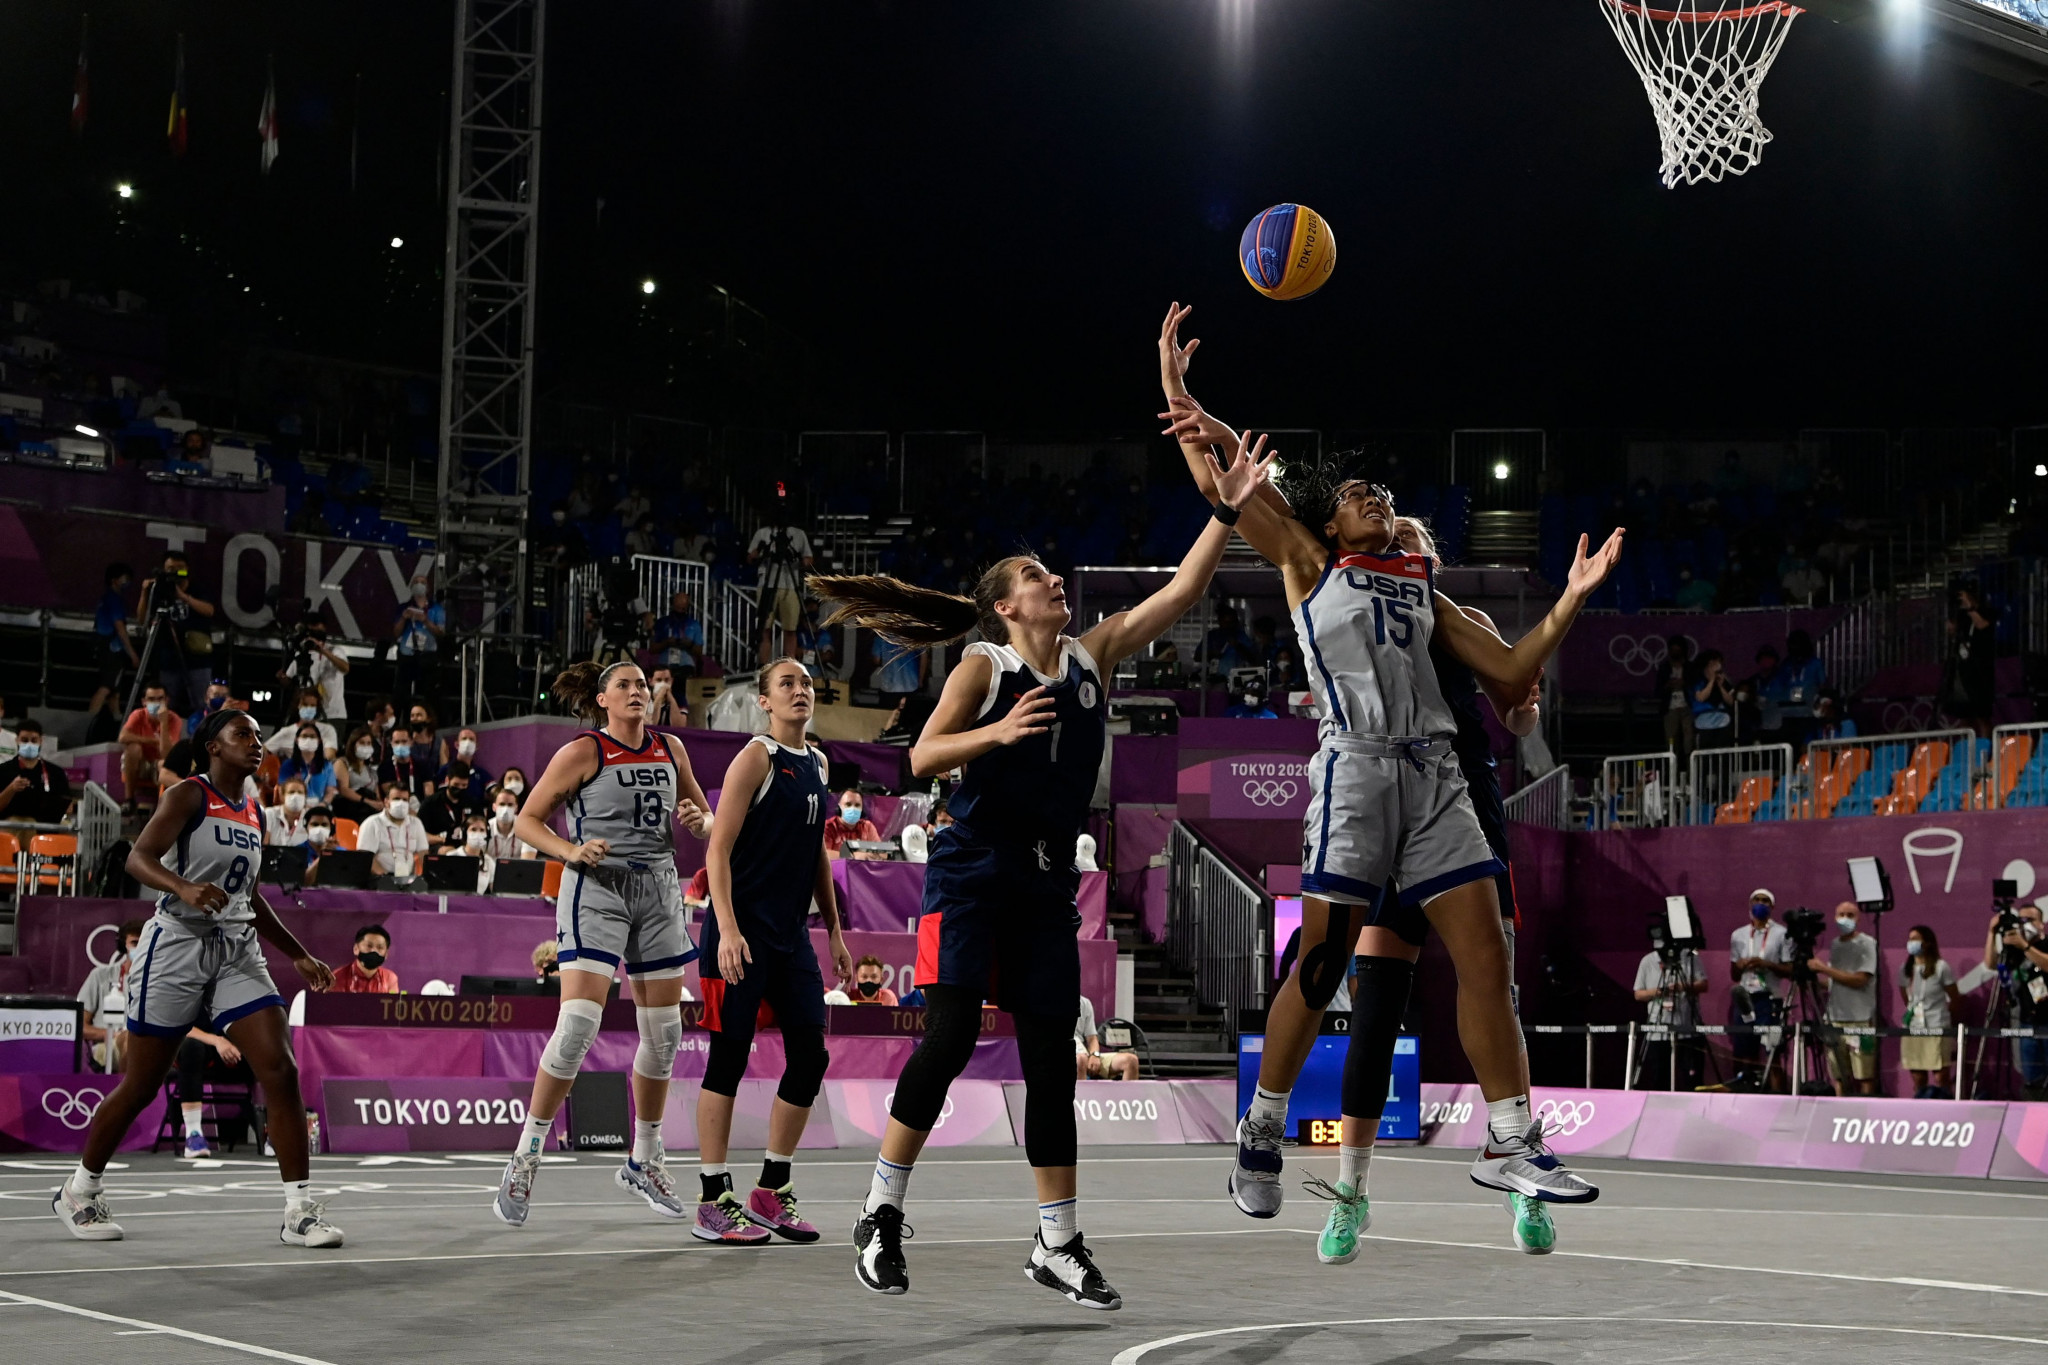 José Perurena highlighted the events such as 3x3 basketball as evidence of the modernisation of the Olympic programme ©Getty Images